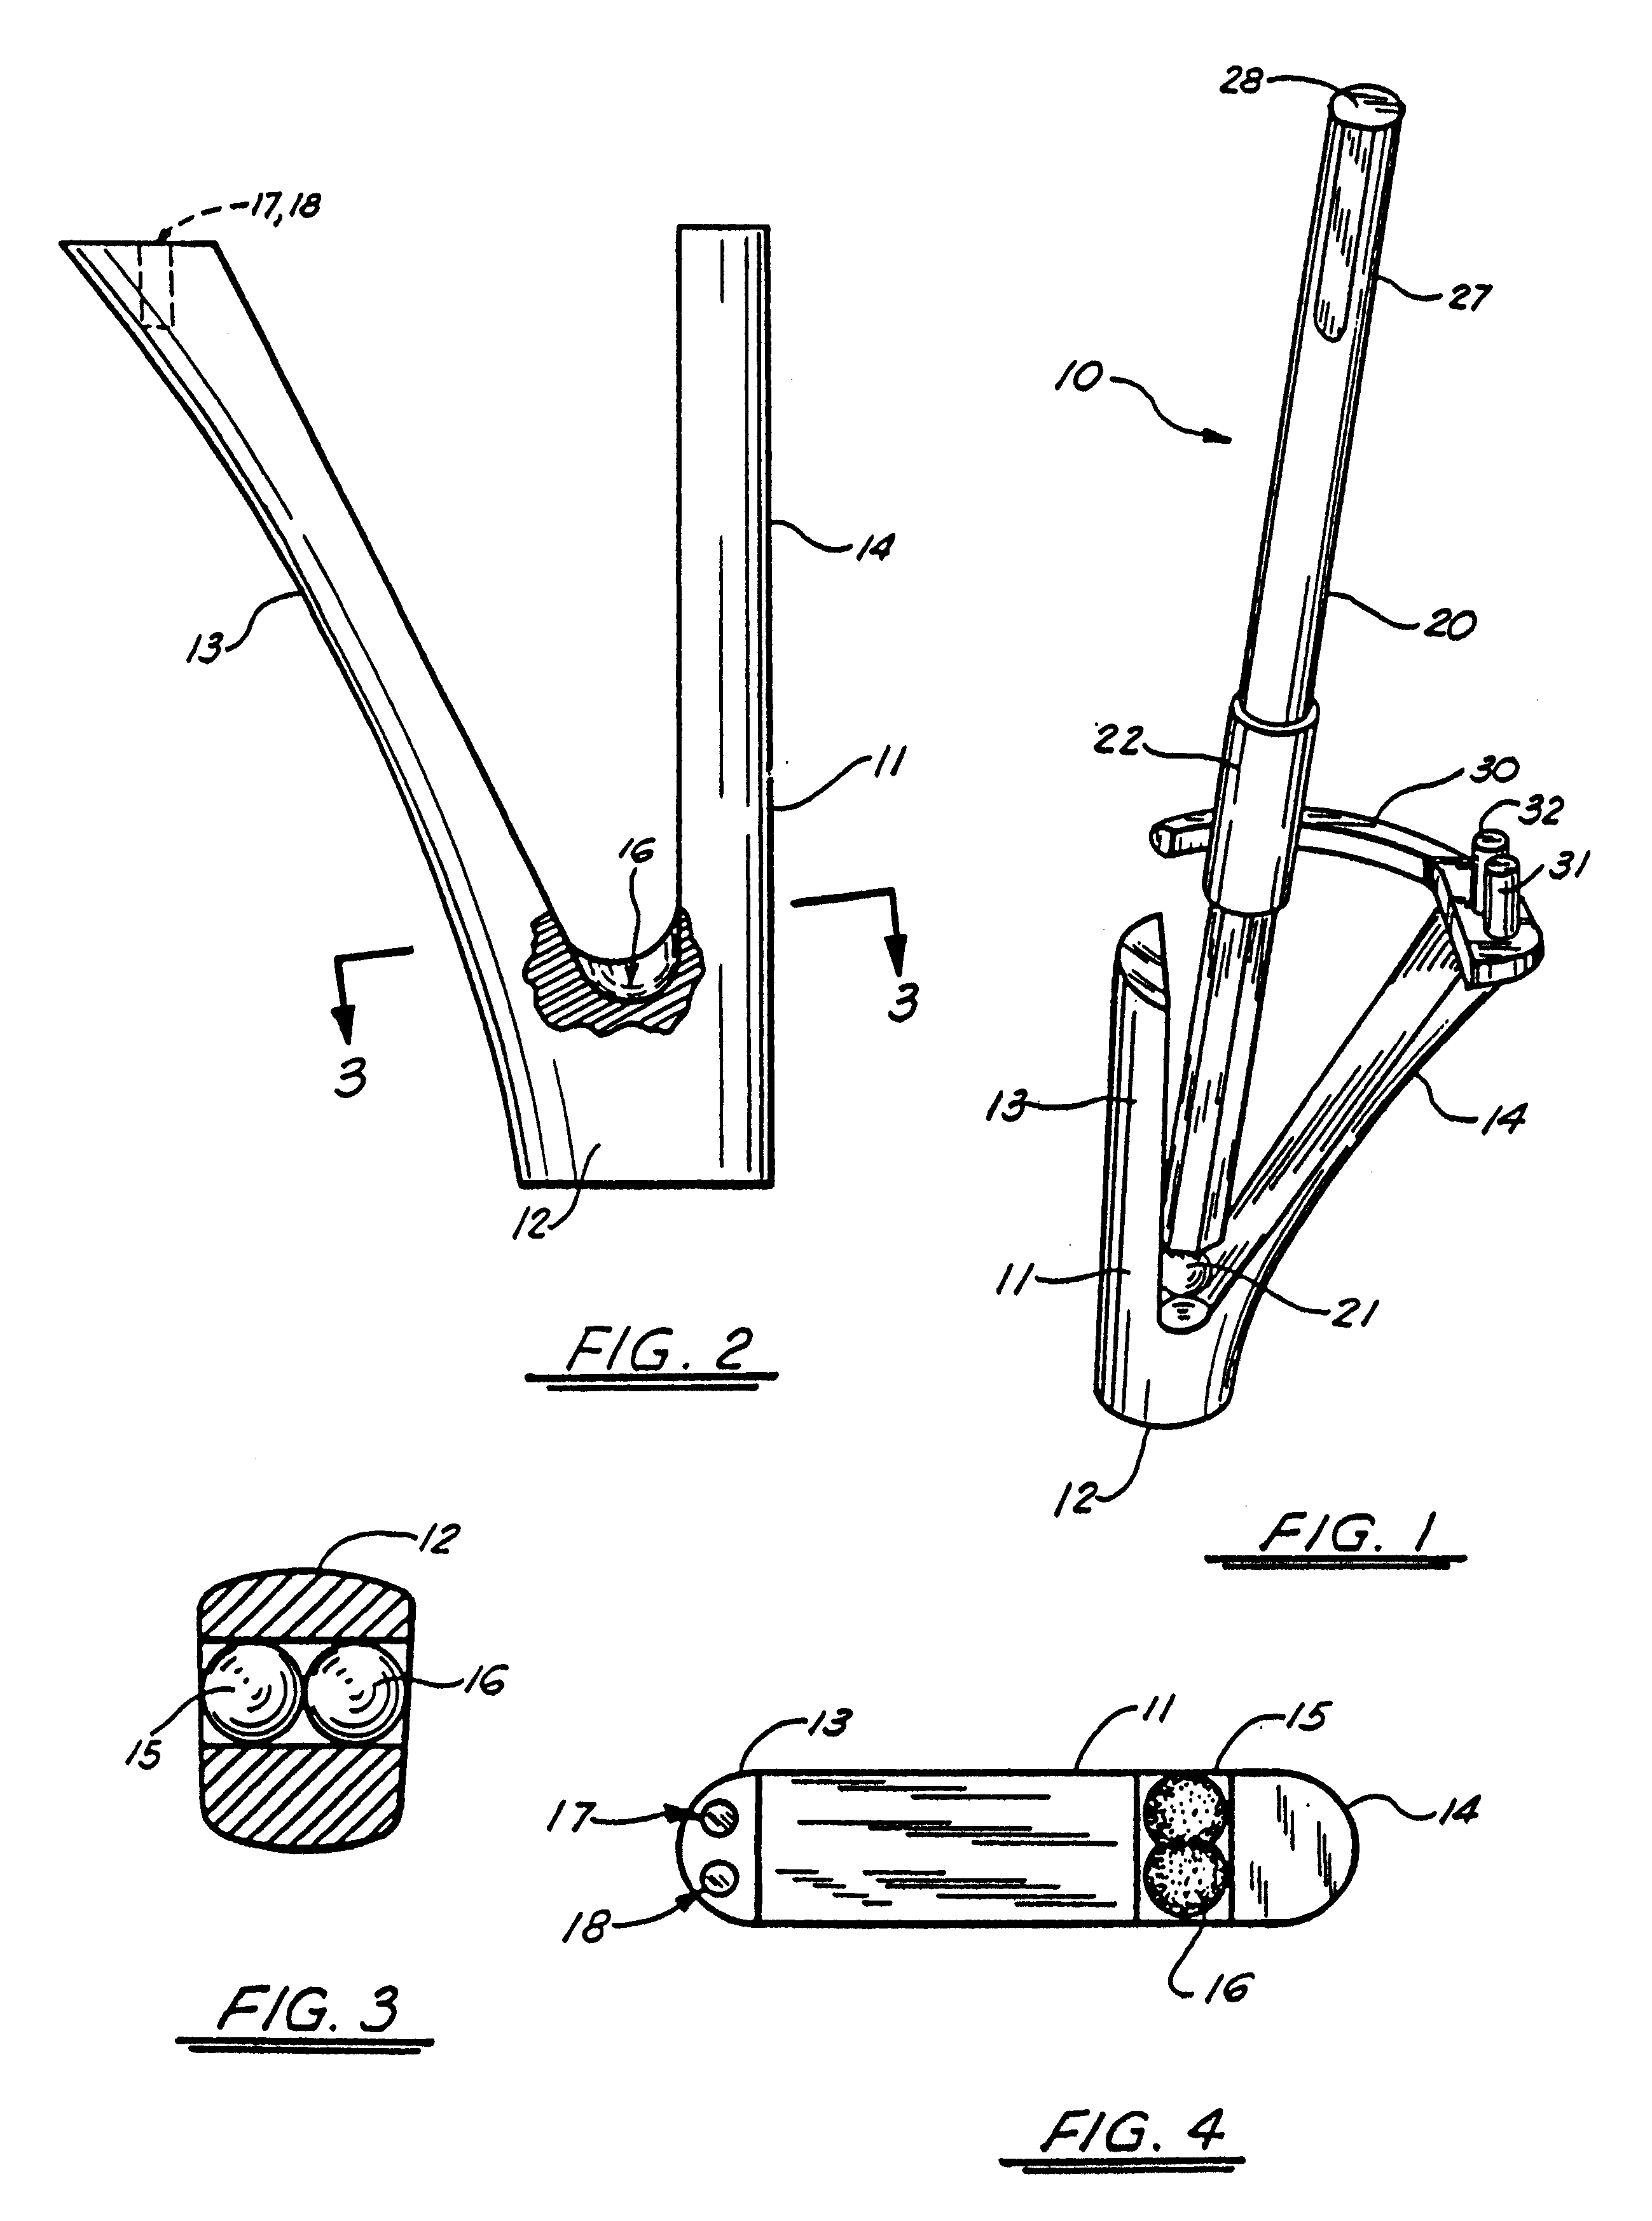 Mill and guide apparatus for preparation of a hip prosthesis